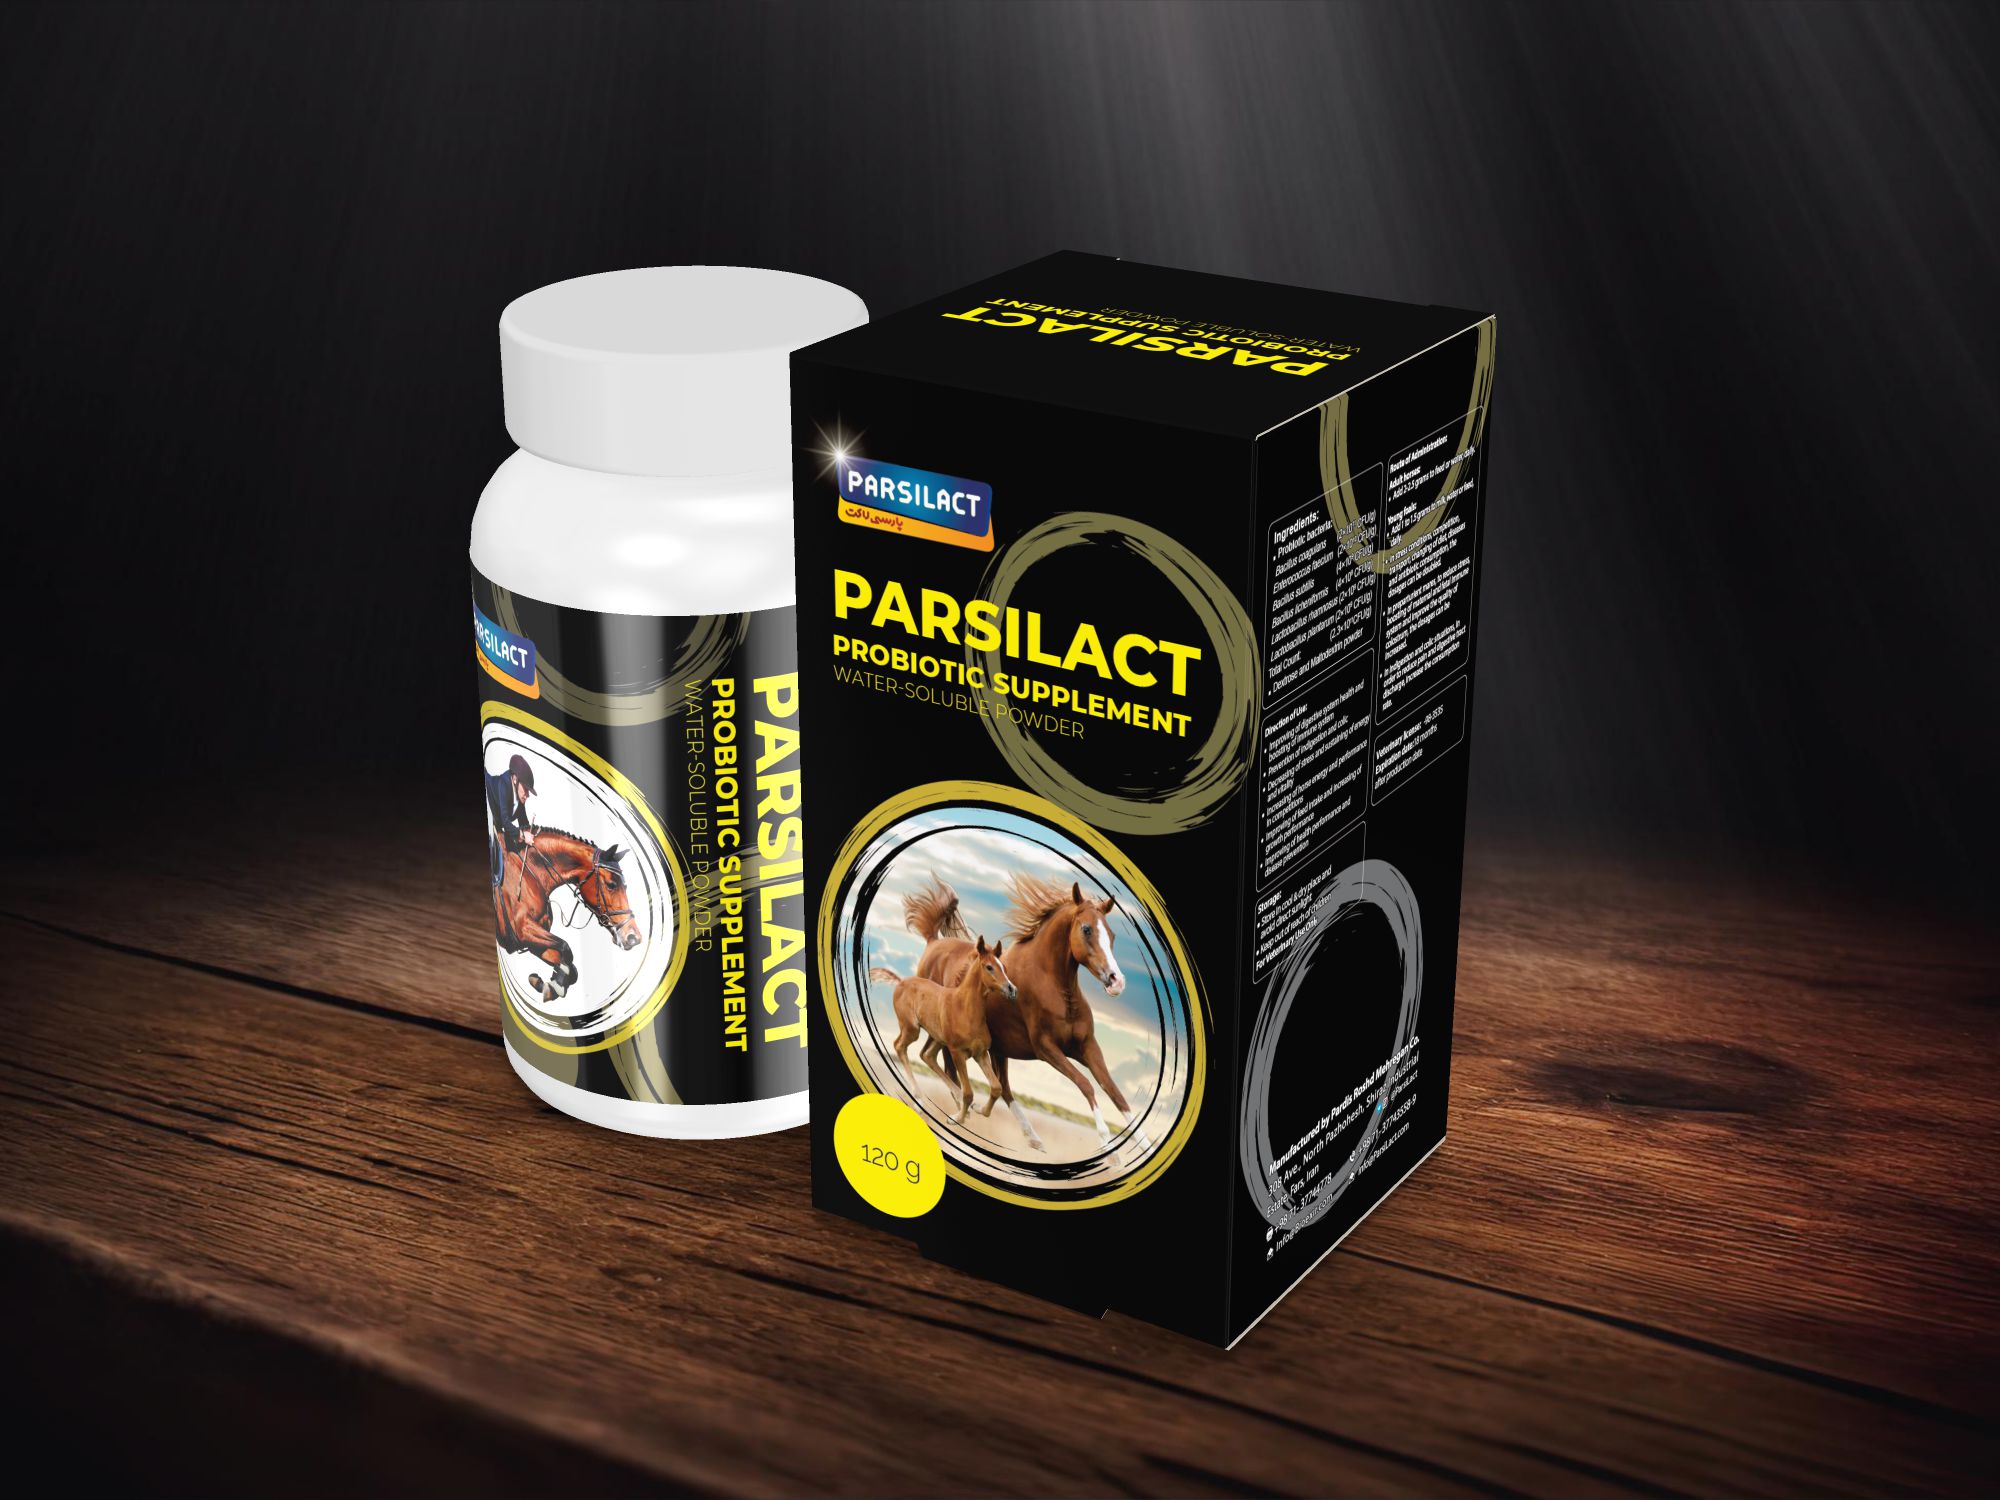 Parsilact Equine Probiotic Supplement packaging